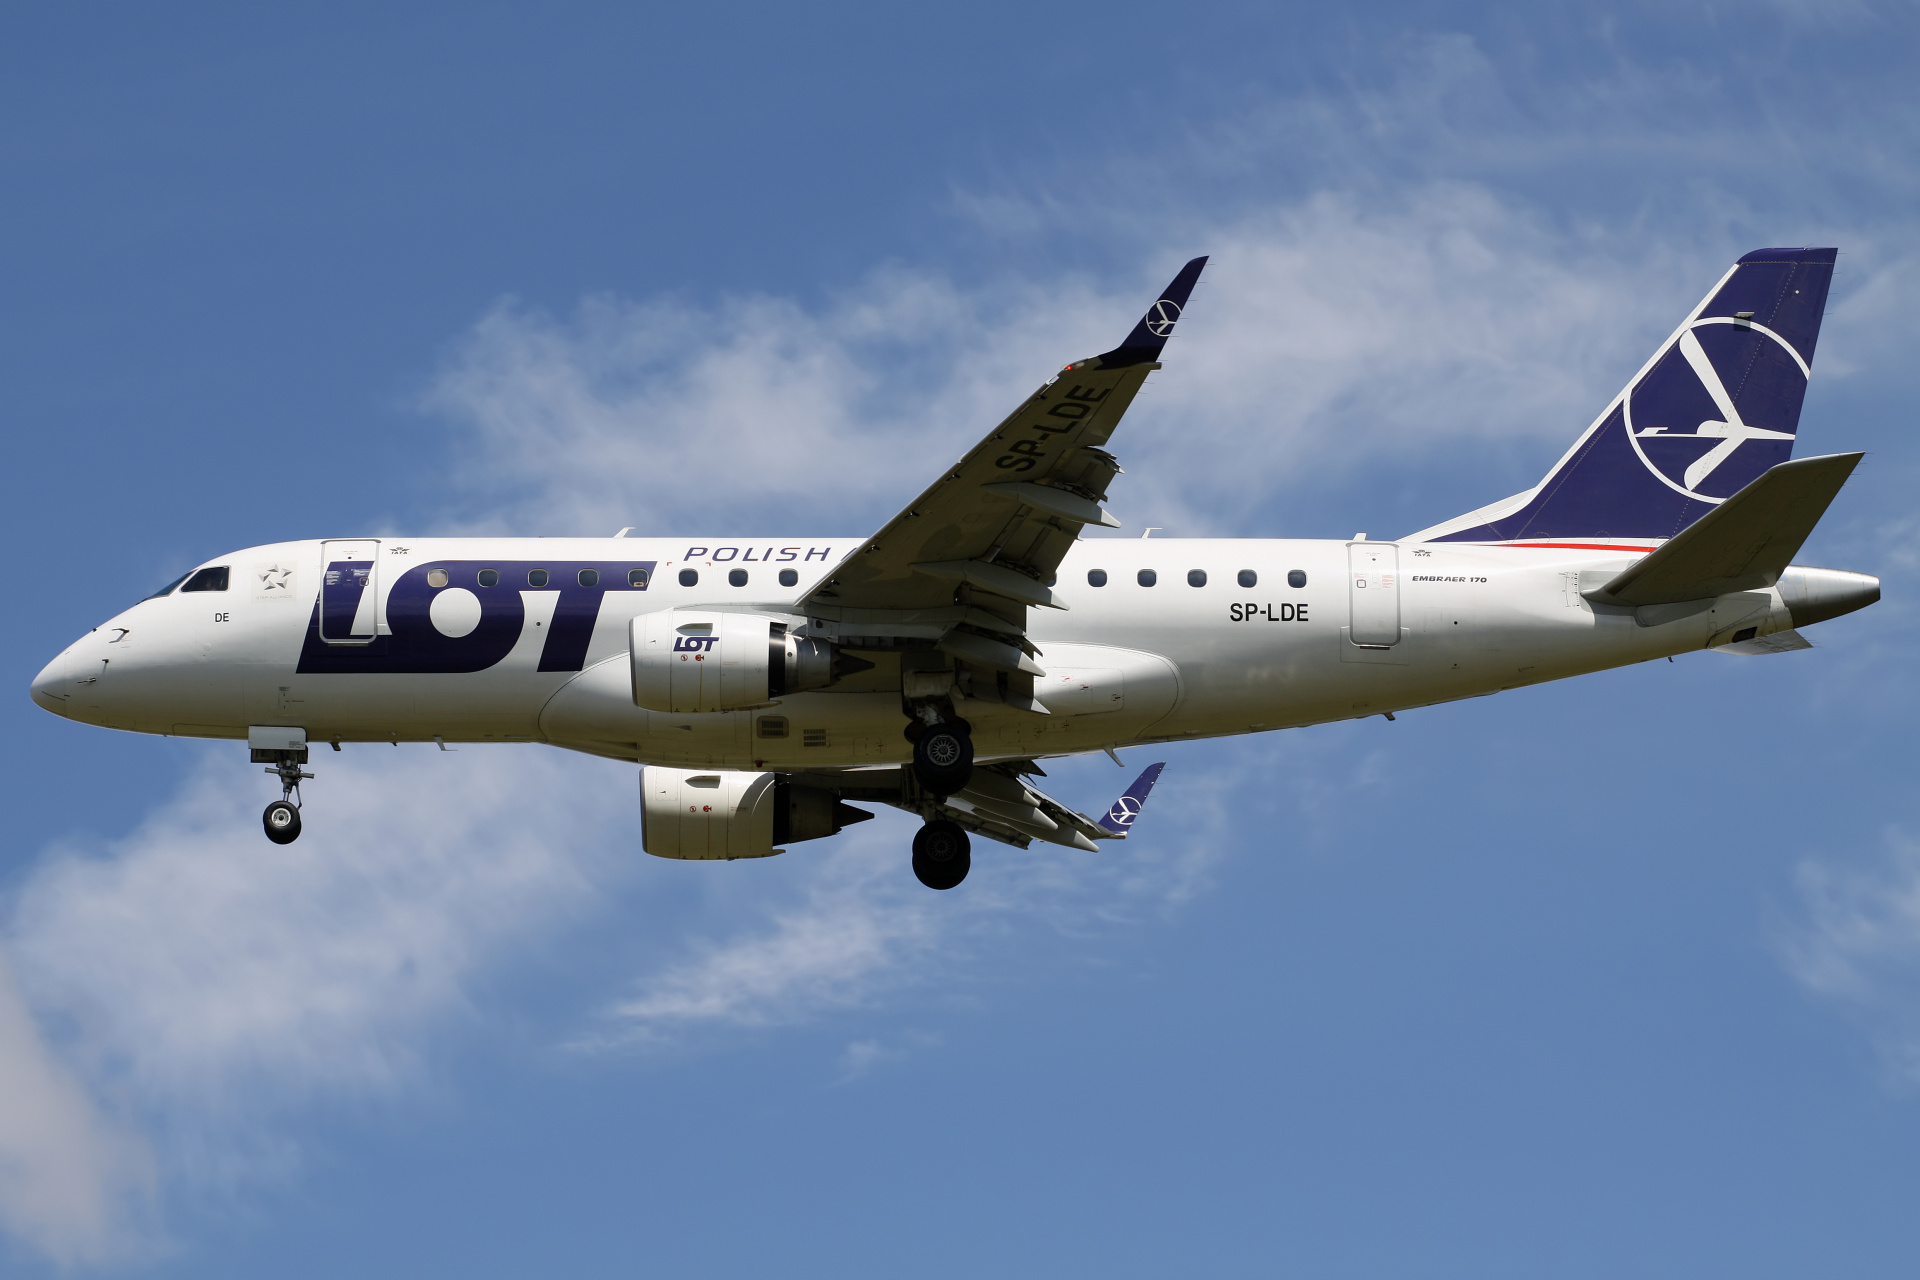 SP-LDE (new livery) (Aircraft » EPWA Spotting » Embraer E170 » LOT Polish Airlines)